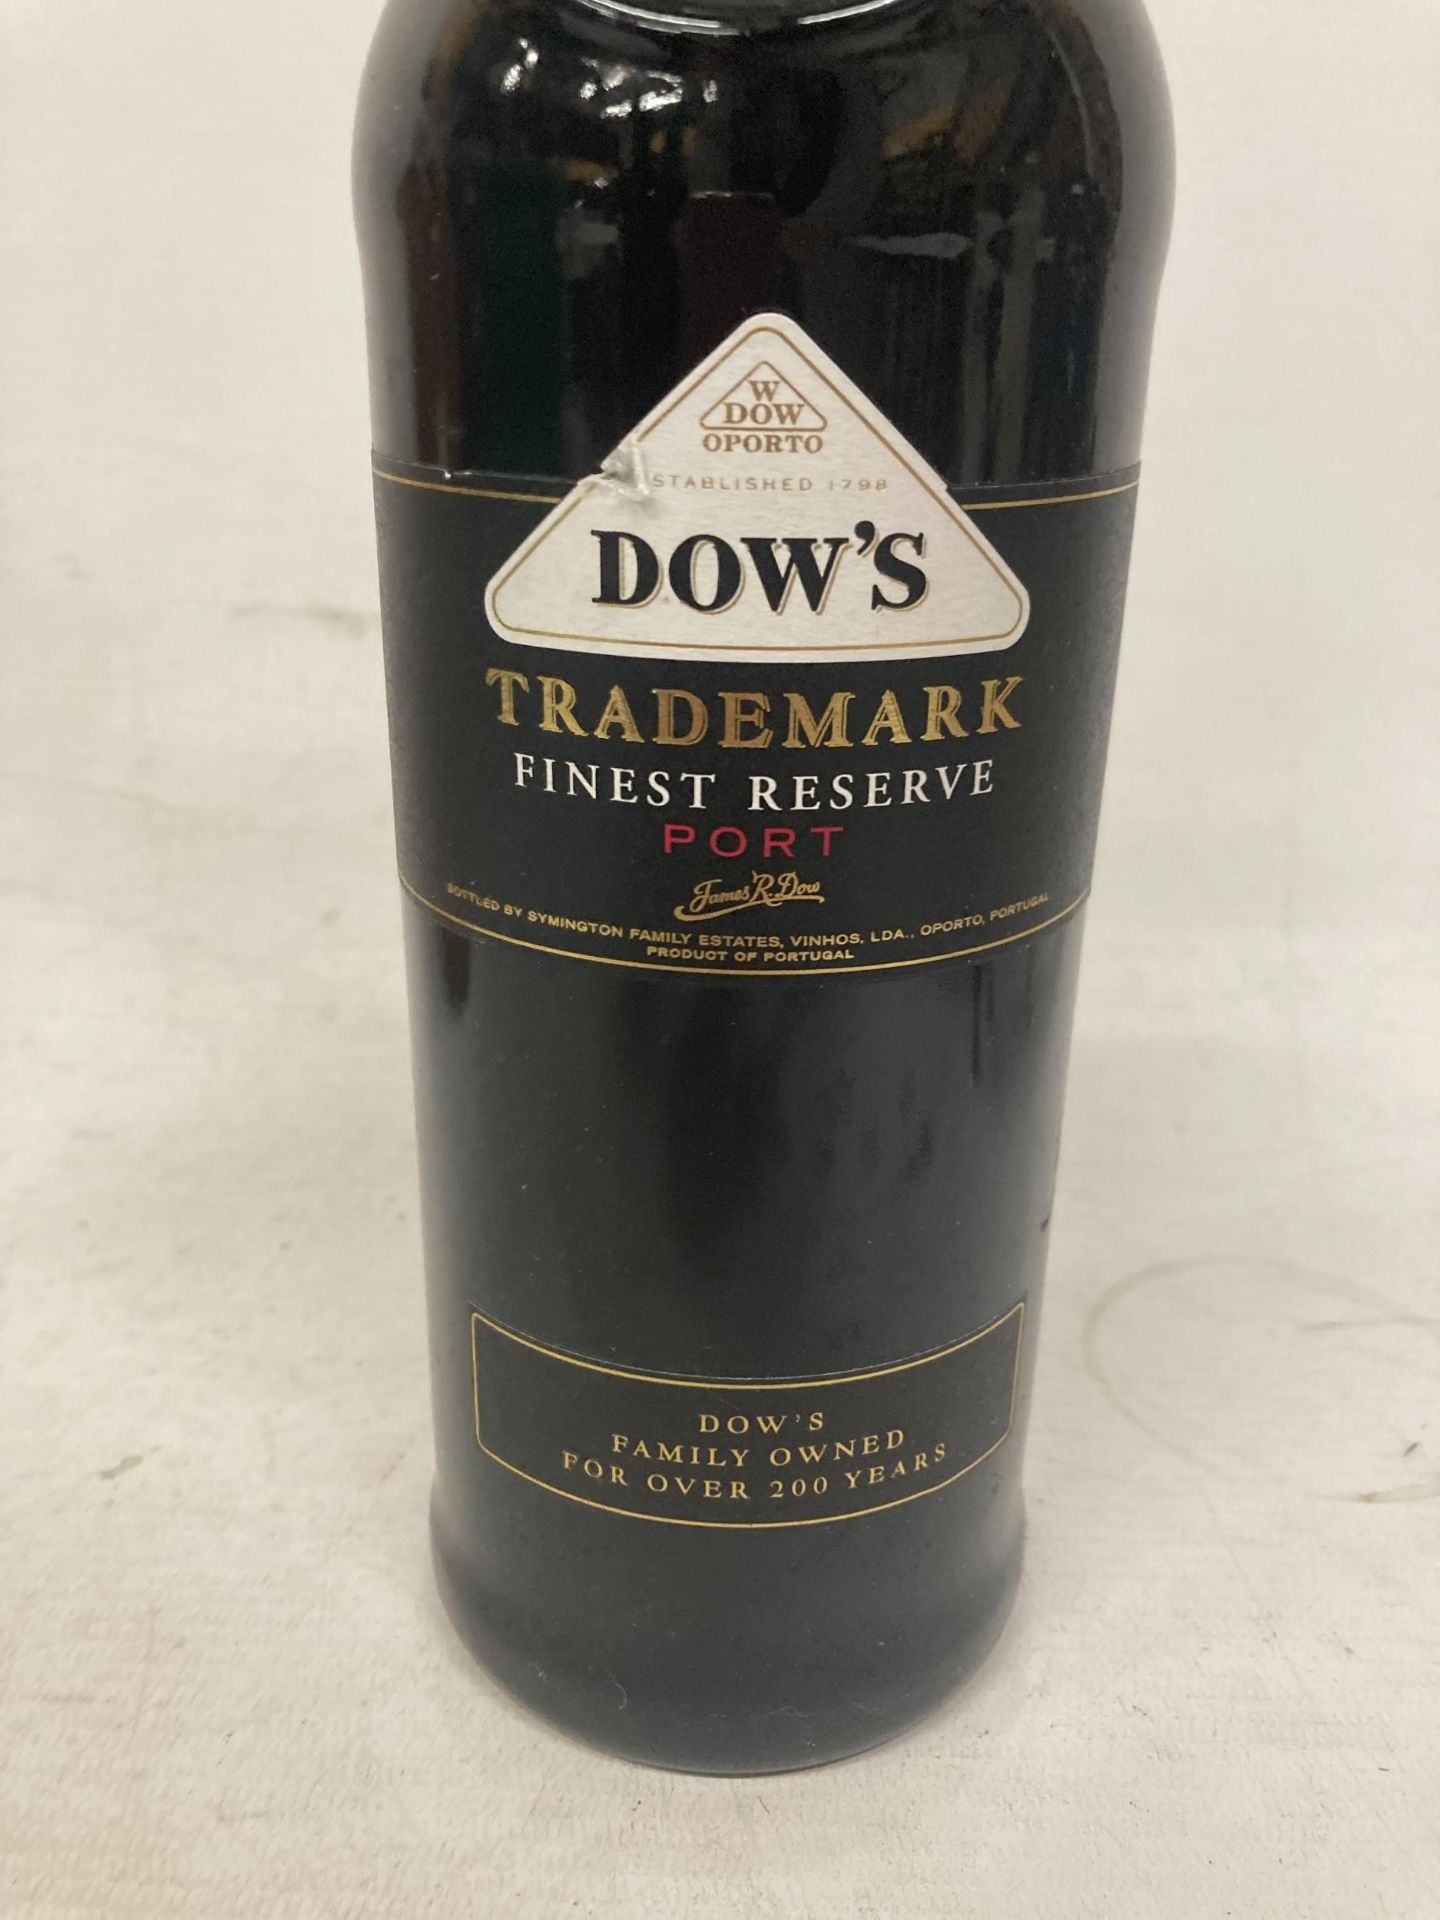 A BOTTLE OF DOWS TRADEMARK FINEST RESERVE PORT - Image 2 of 4